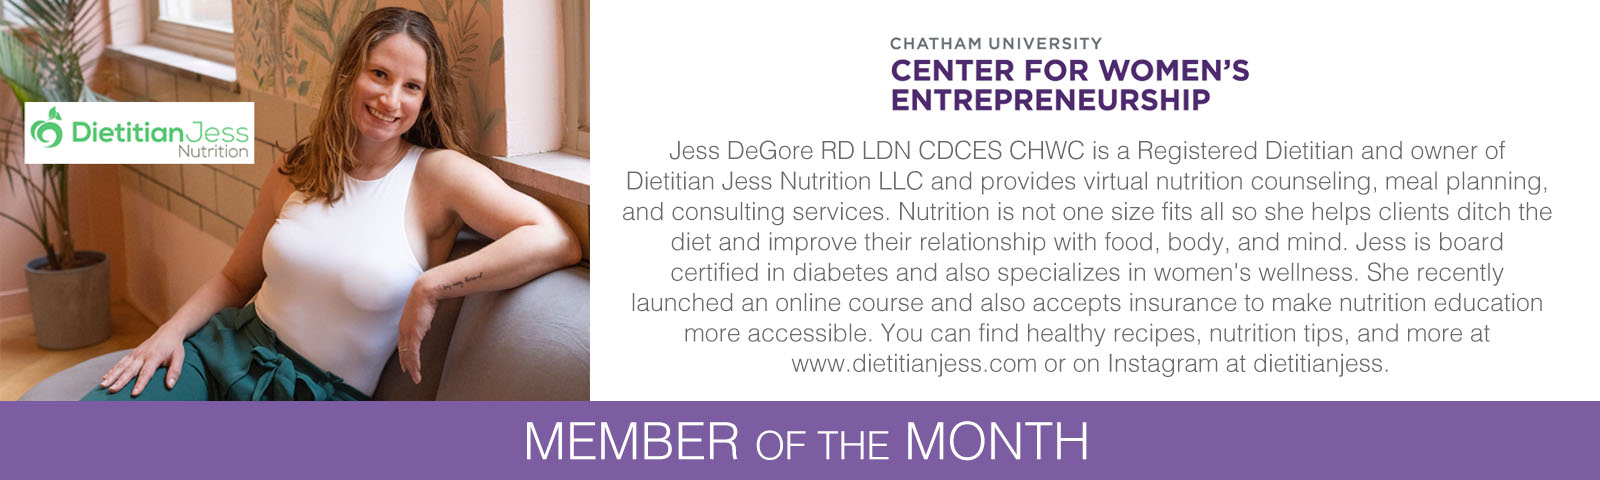 Jess DeGore RD LDN CDCES CHWC is a Registered Dietitian and owner of Dietitian Jess Nutrition LLC and provides virtual nutrition counseling, meal planning, and consulting services. Nutrition is not one size fits all so she helps clients ditch the diet and improve their relationship with food, body, and mind. Jess is board certified in diabetes and also specializes in women's wellness. She recently launched an online course and also accepts insurance to make nutrition education more accessible. You can find healthy recipes, nutrition tips, and more at www.dietitianjess.com or on Instagram at dietitianjess.